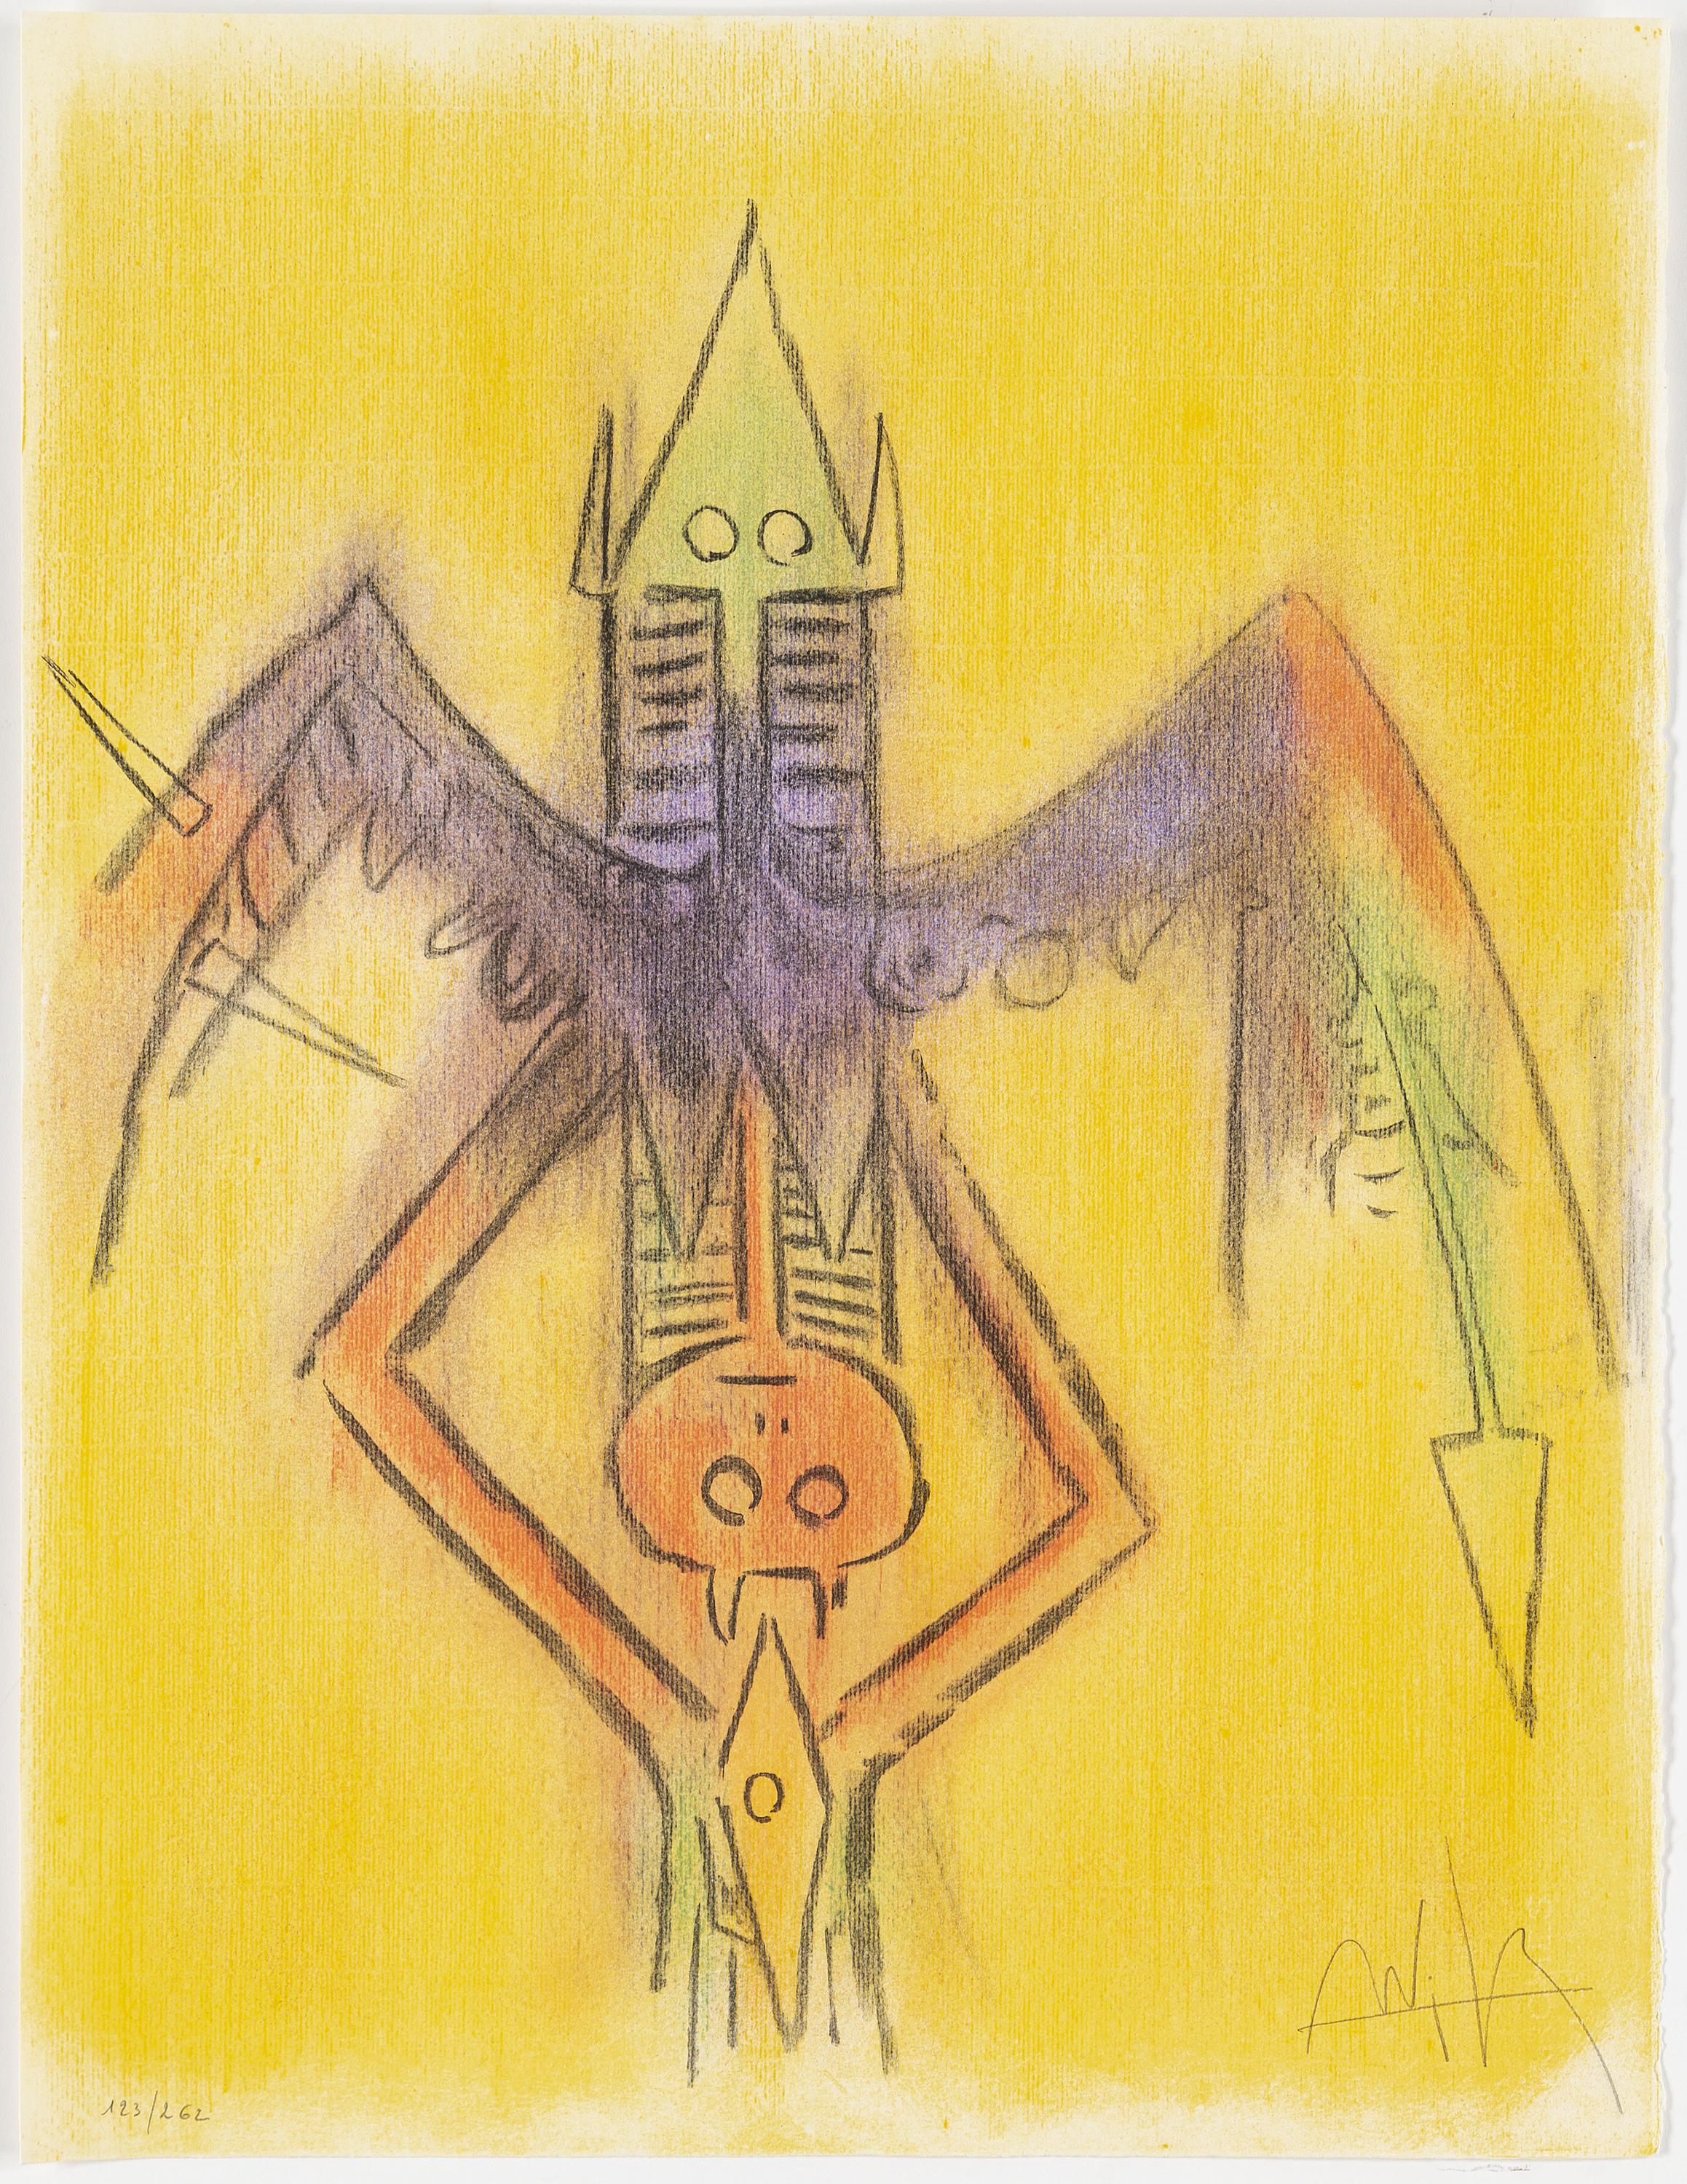 Modern Wifredo Lam, Portfolio of 10 Signed Color Lithographs, Edition 123 of 262 For Sale